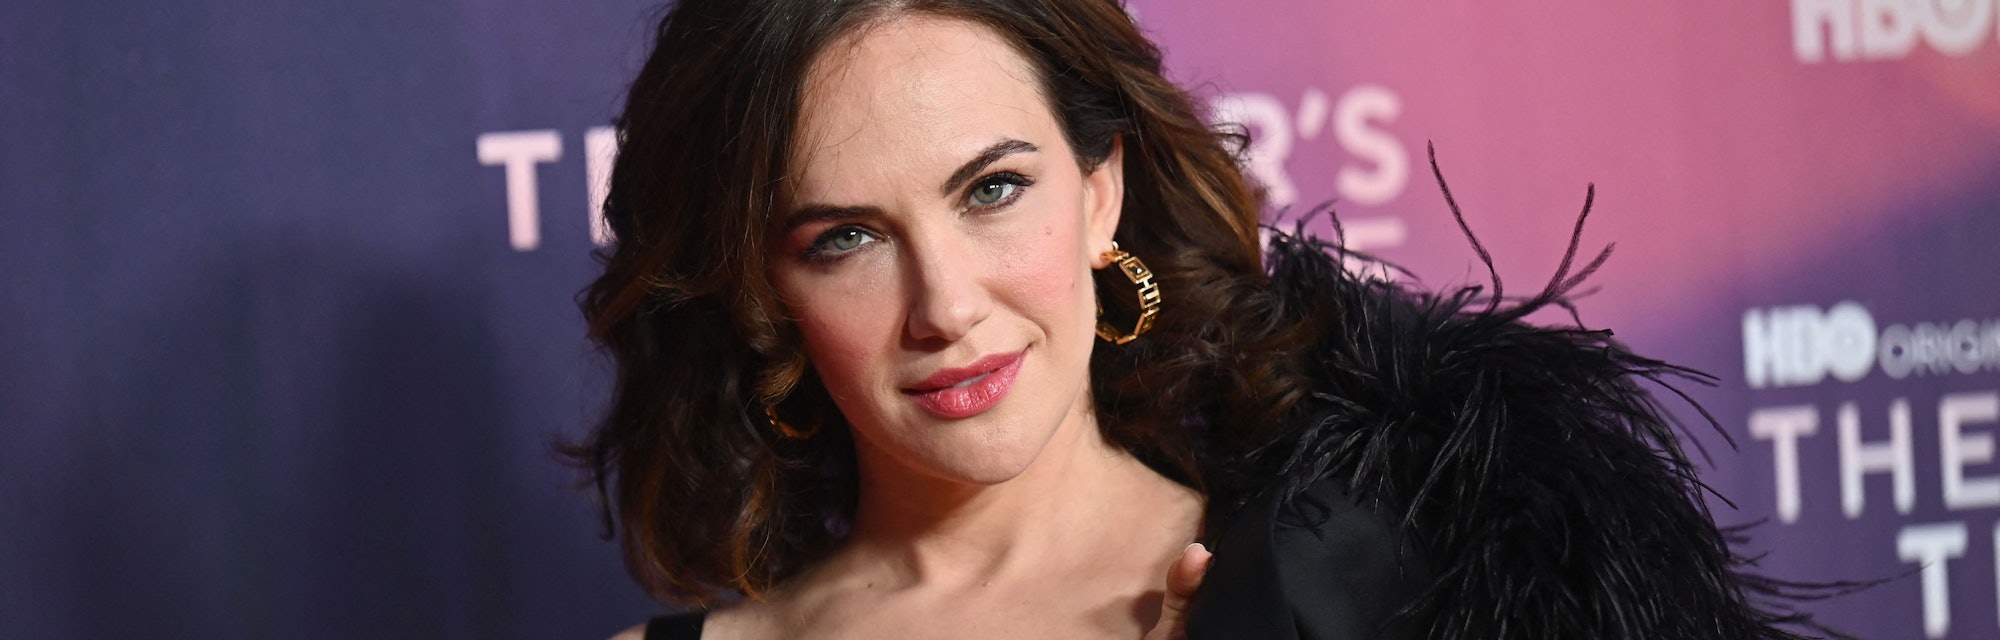 US actress Kate Siegel attends the HBO premiere of "The Time Traveler's Wife" at Morgan Library on M...